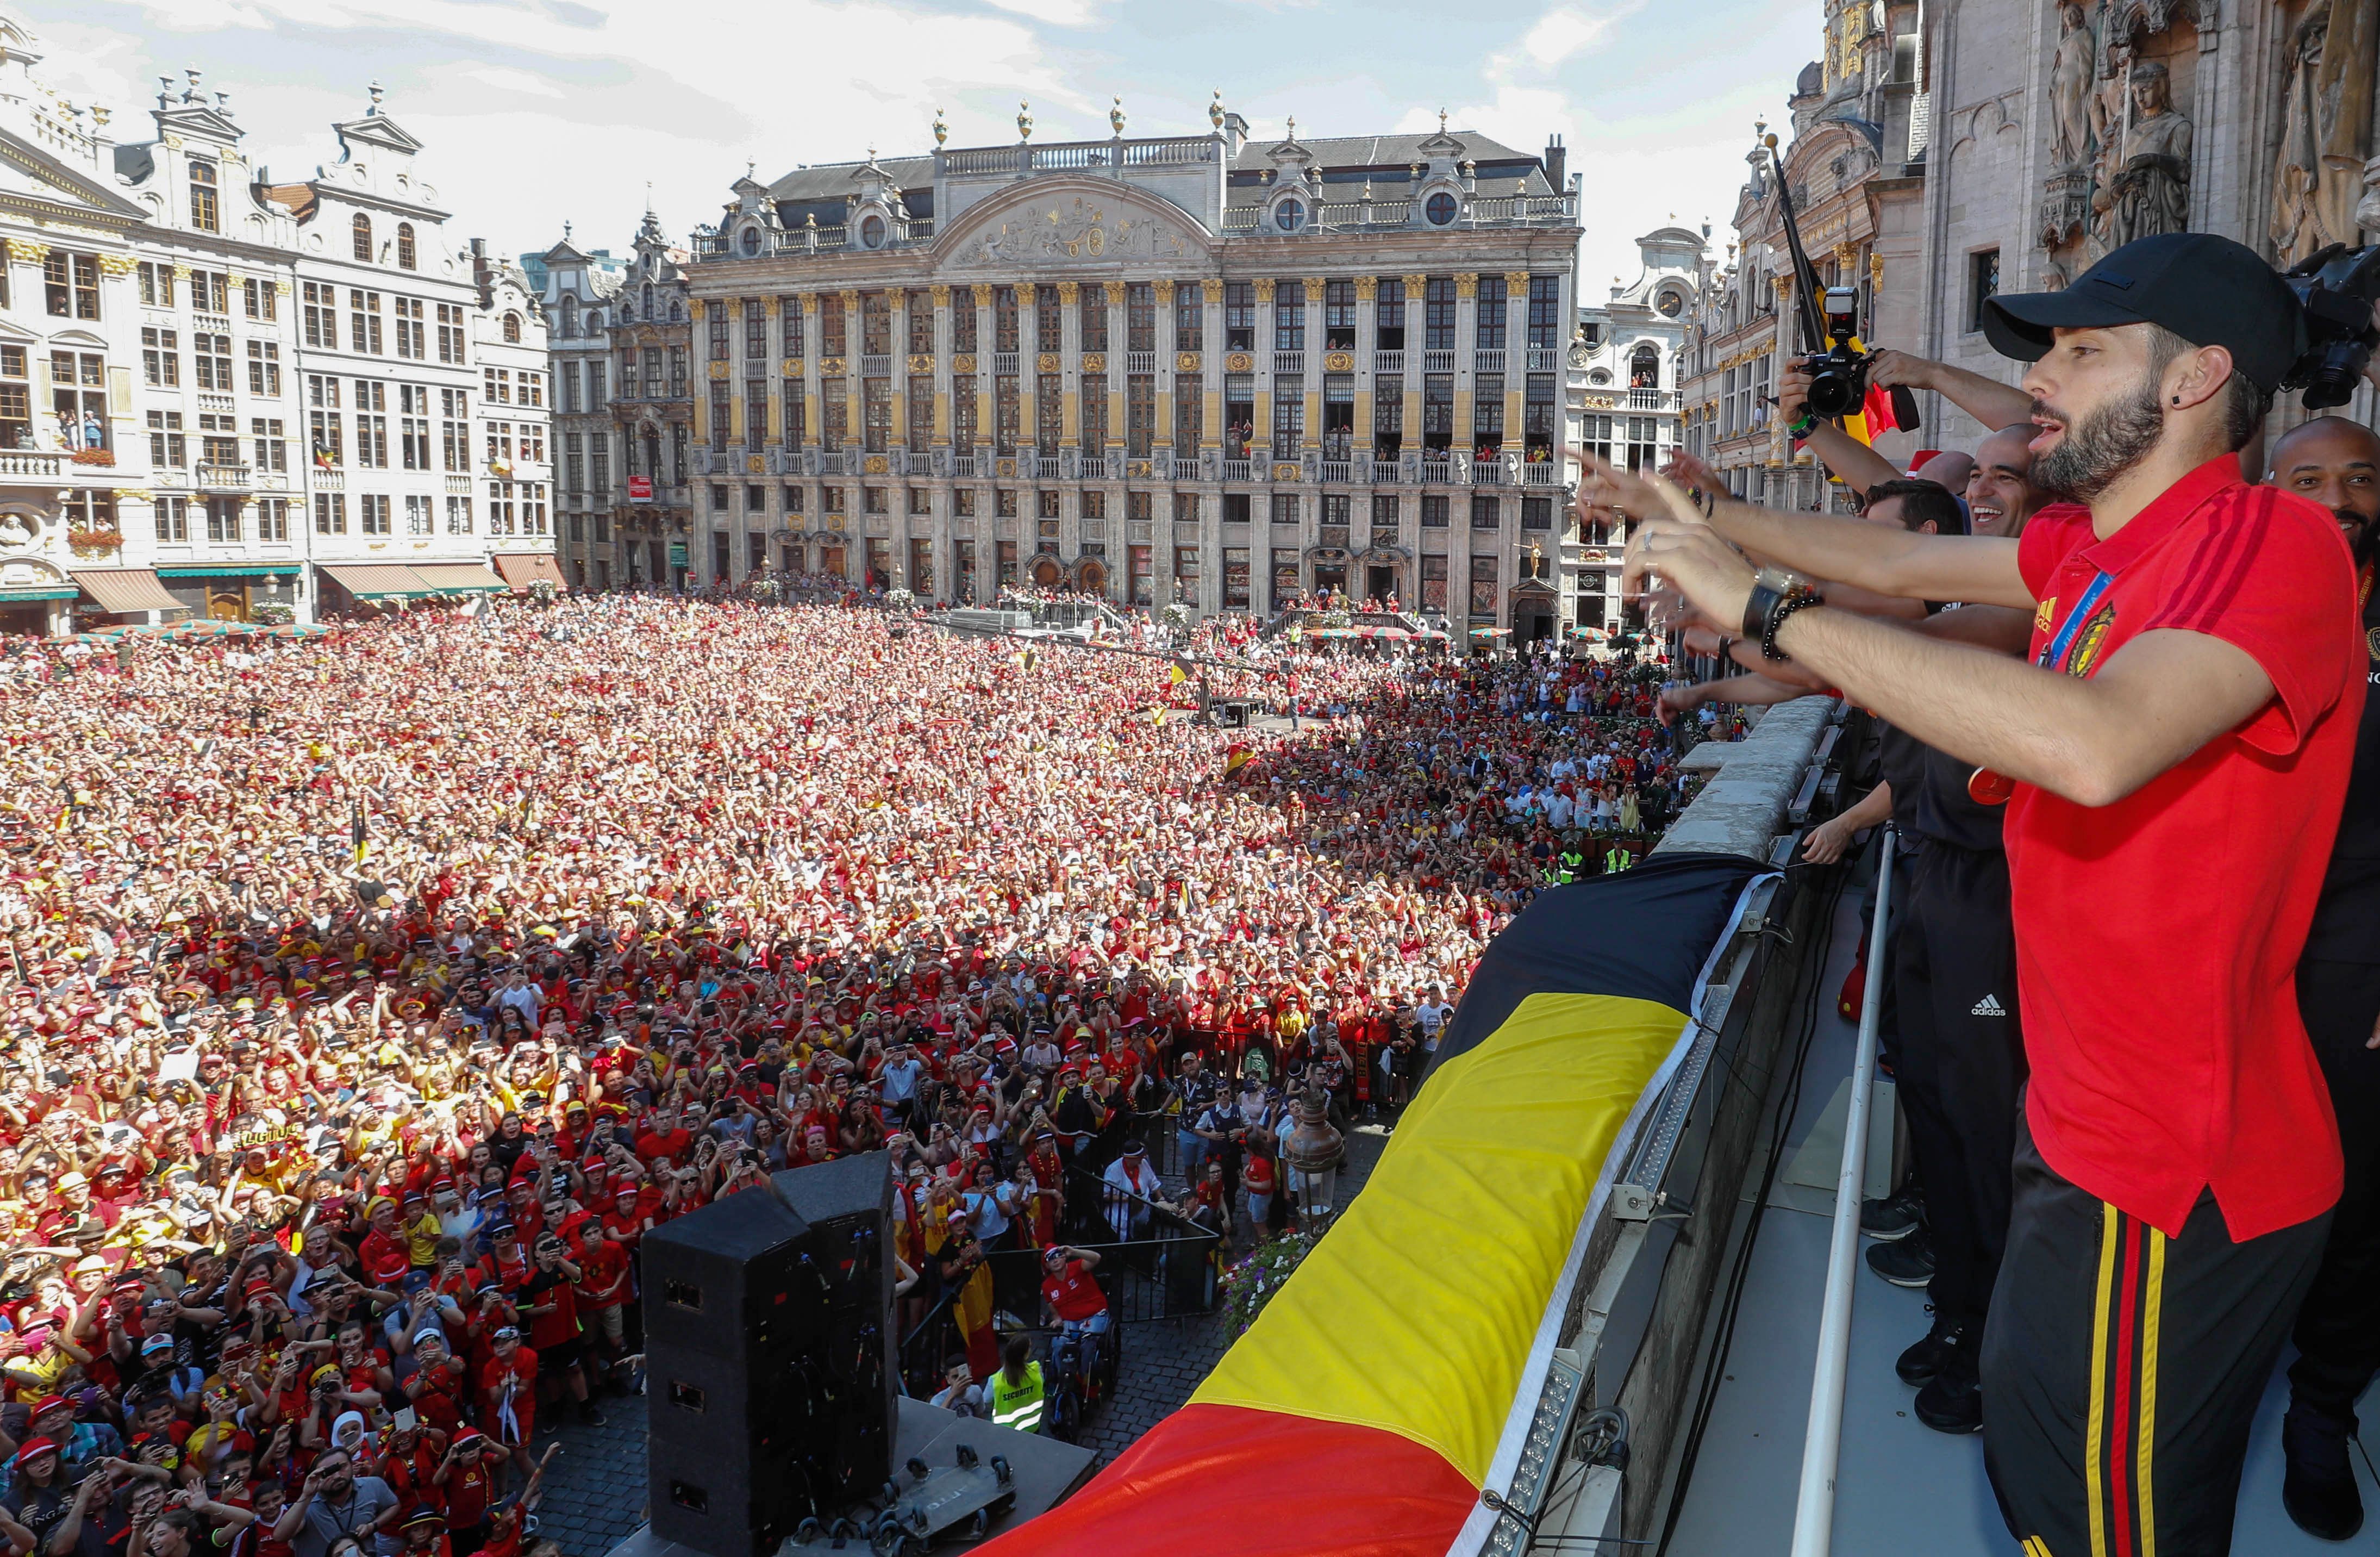 Belgium's Yannick Carrasco celebrates at the balcony in front of more than 8000 supporters at the Grand-Place, Grote Markt in Brussels city center, as Belgian national football team Red Devils arrive to celebrate with supporters at the balcony of the city hall after reaching the semi-finals and winning the bronze medal at the Russia 2018 World Cup, on July 15, 2018. (Photo by Yves HERMAN / BELGA / AFP) / Belgium OUT        (Photo credit should read YVES HERMAN/AFP/Getty Images)